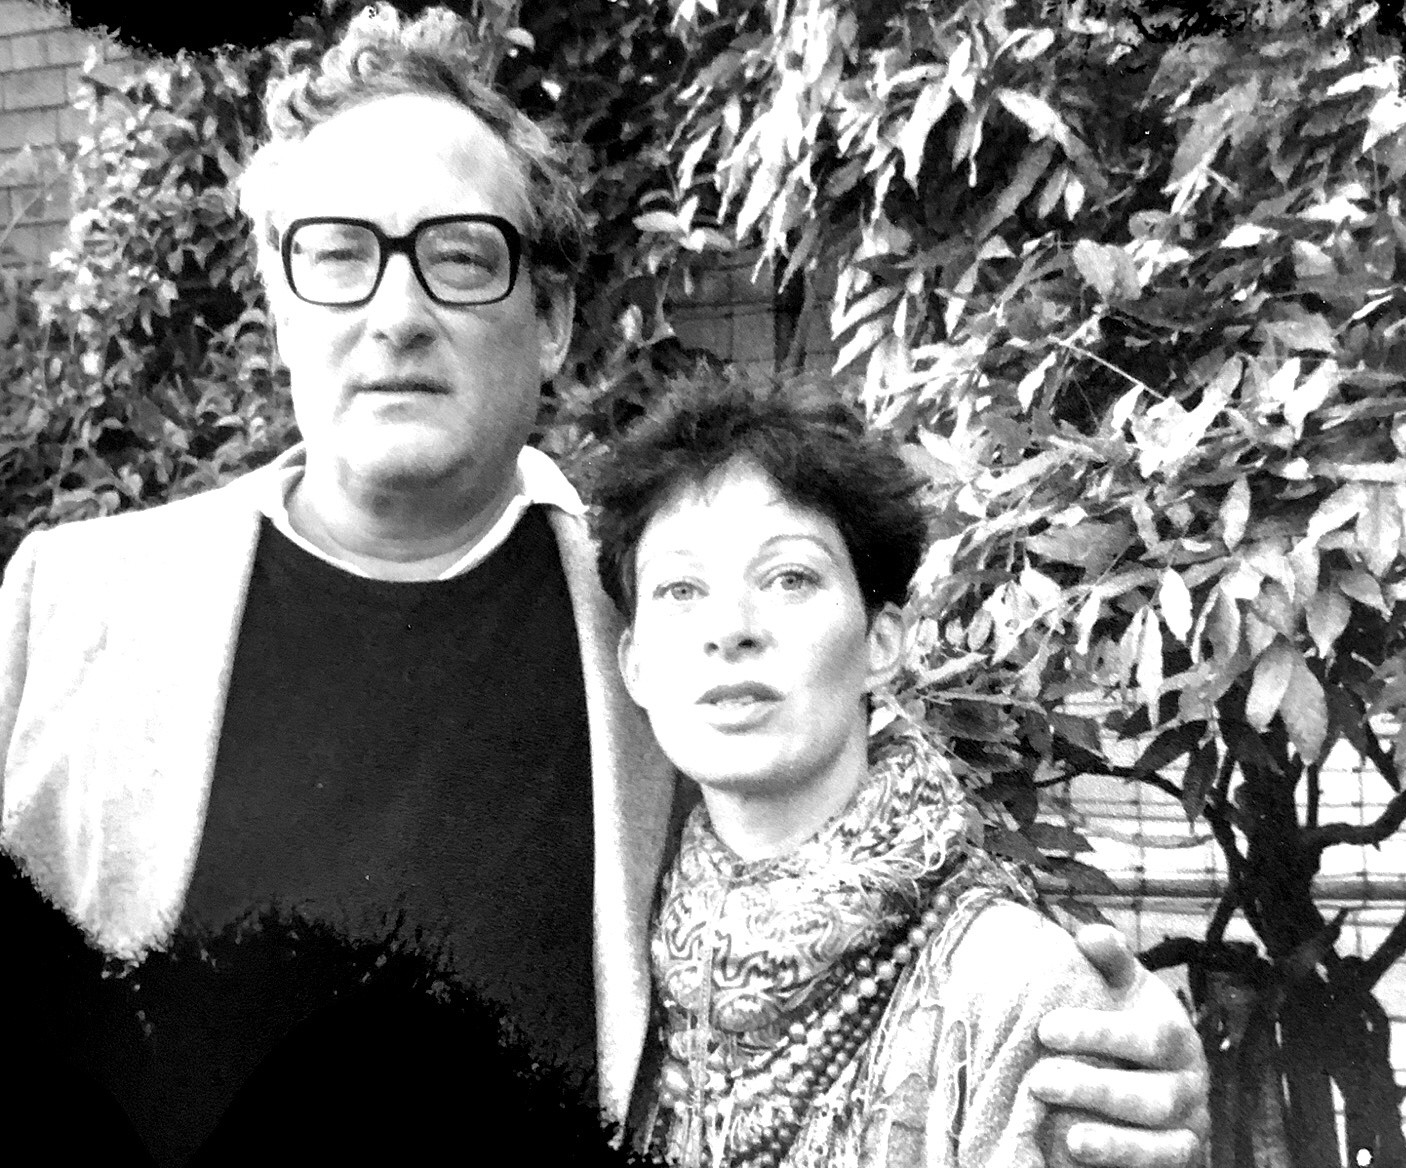 A close-up, black-and-white photograph of Kenward Elmslie holding Ann Lauterbach to his side. They're standing at the side of a house, in front of some trees, both looking a bit bewildered at the camera.